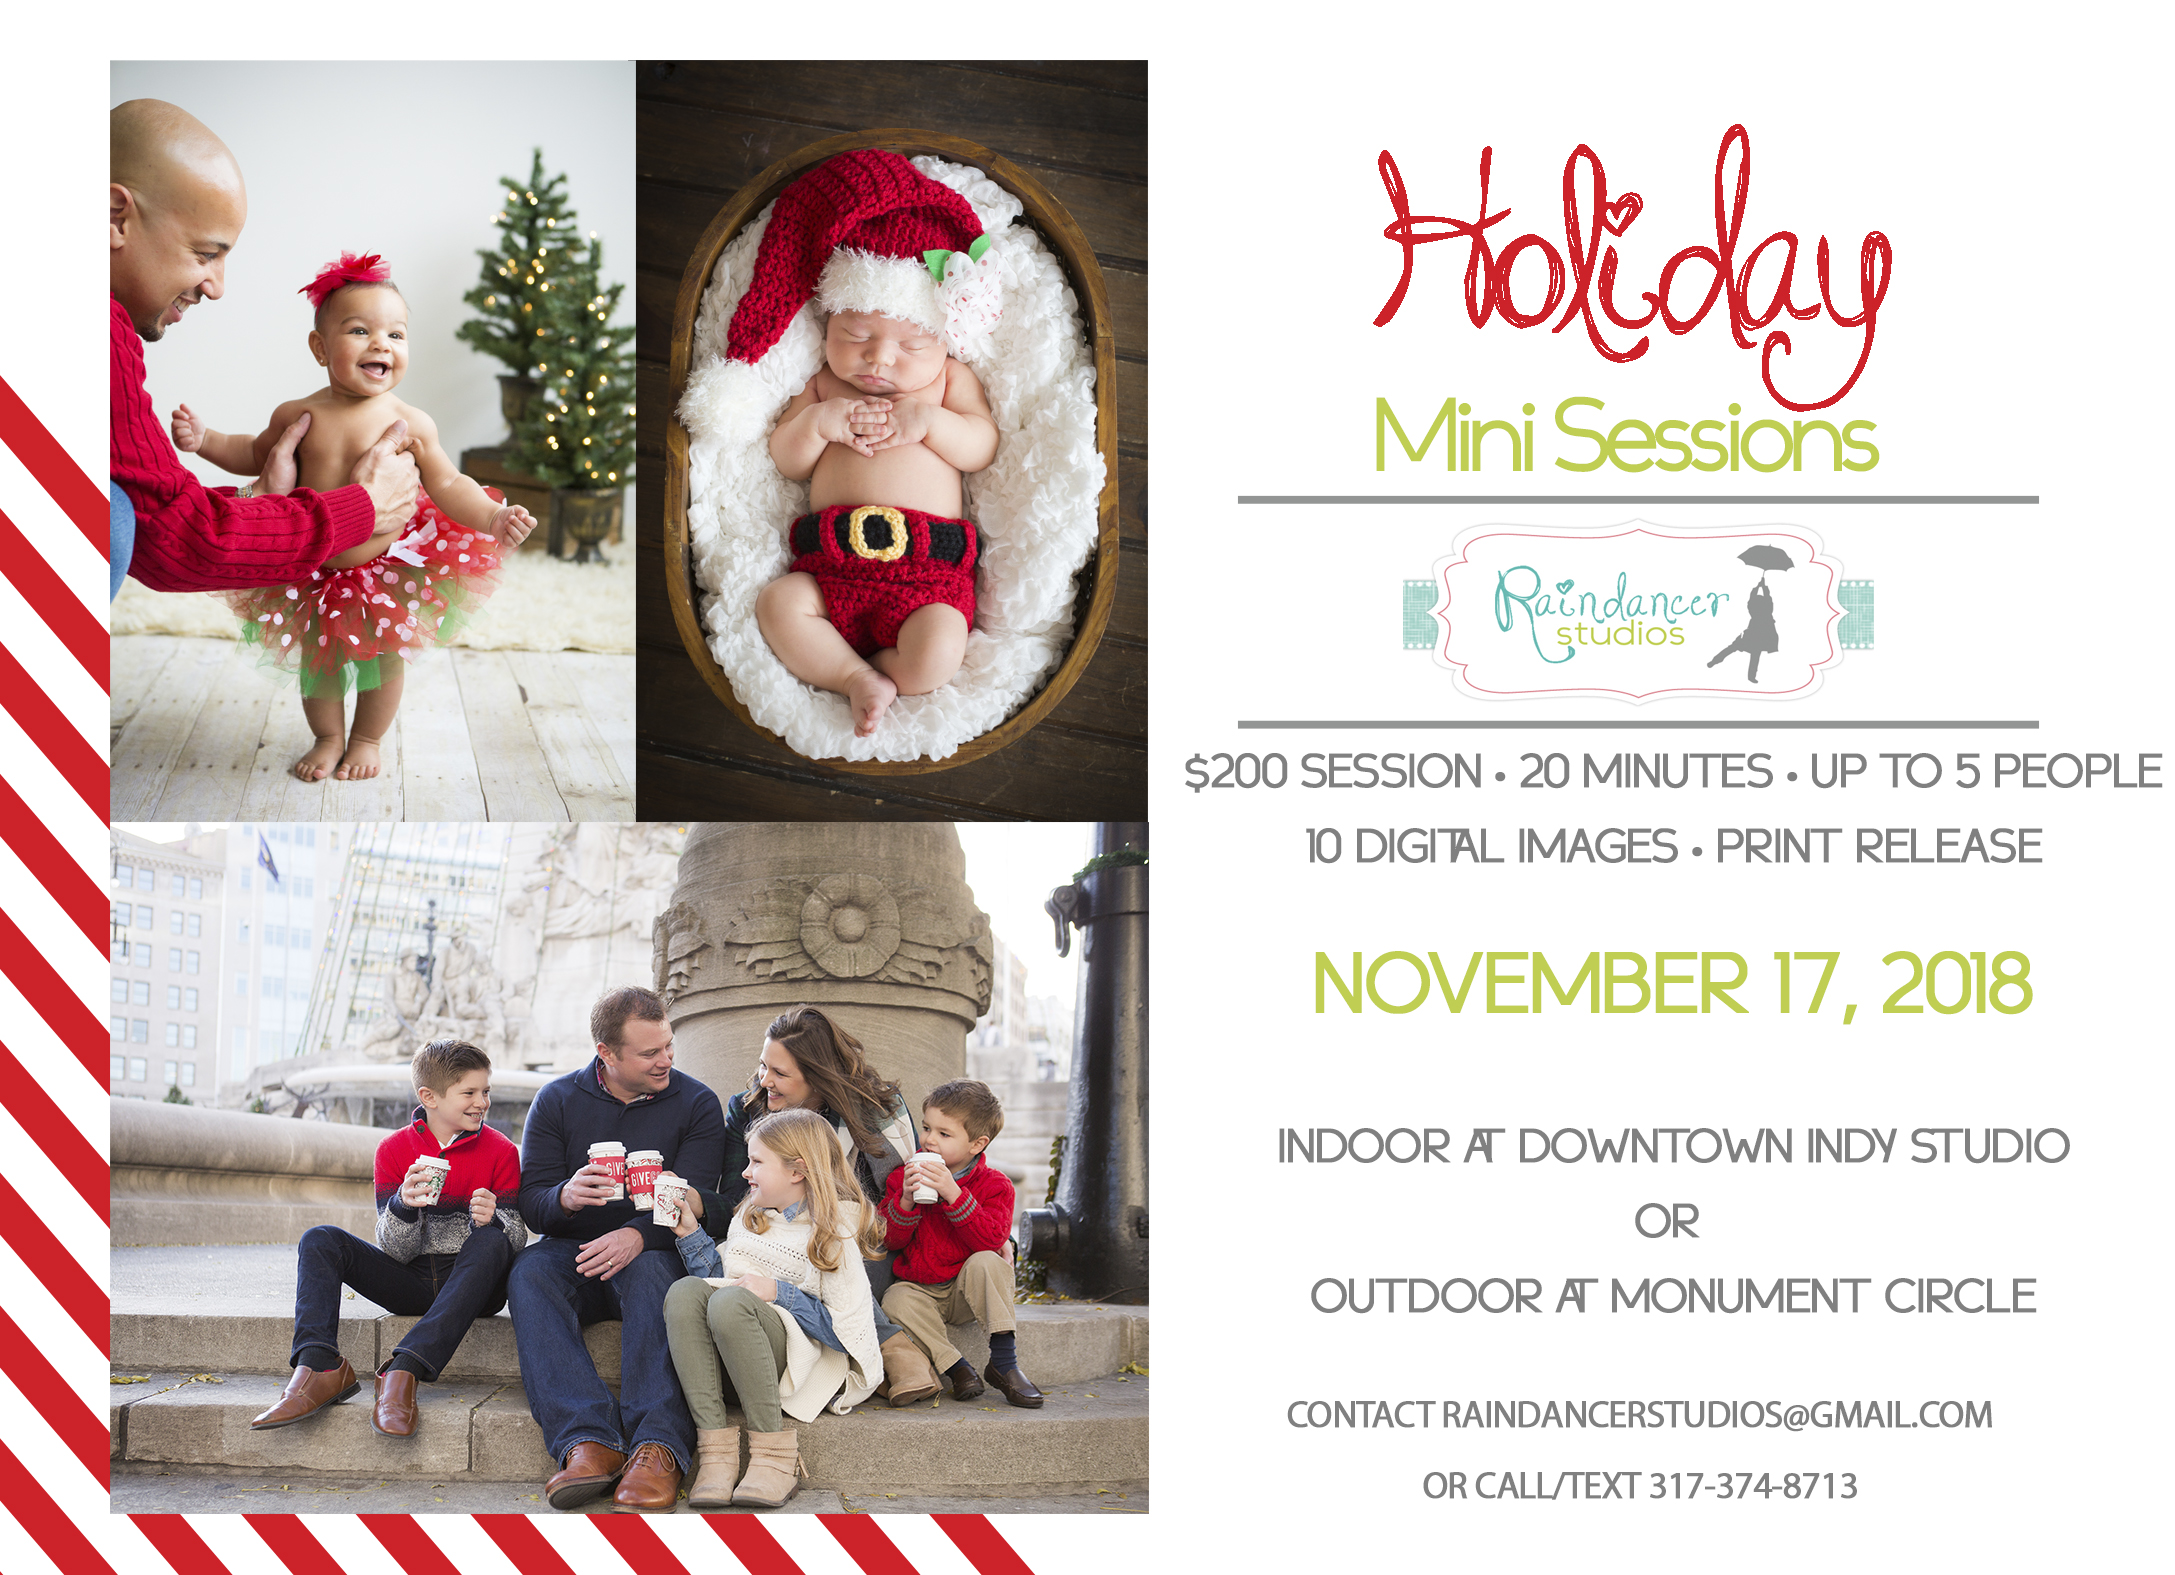 Indianapolis Holiday Mini Sessions in Downtown Indy